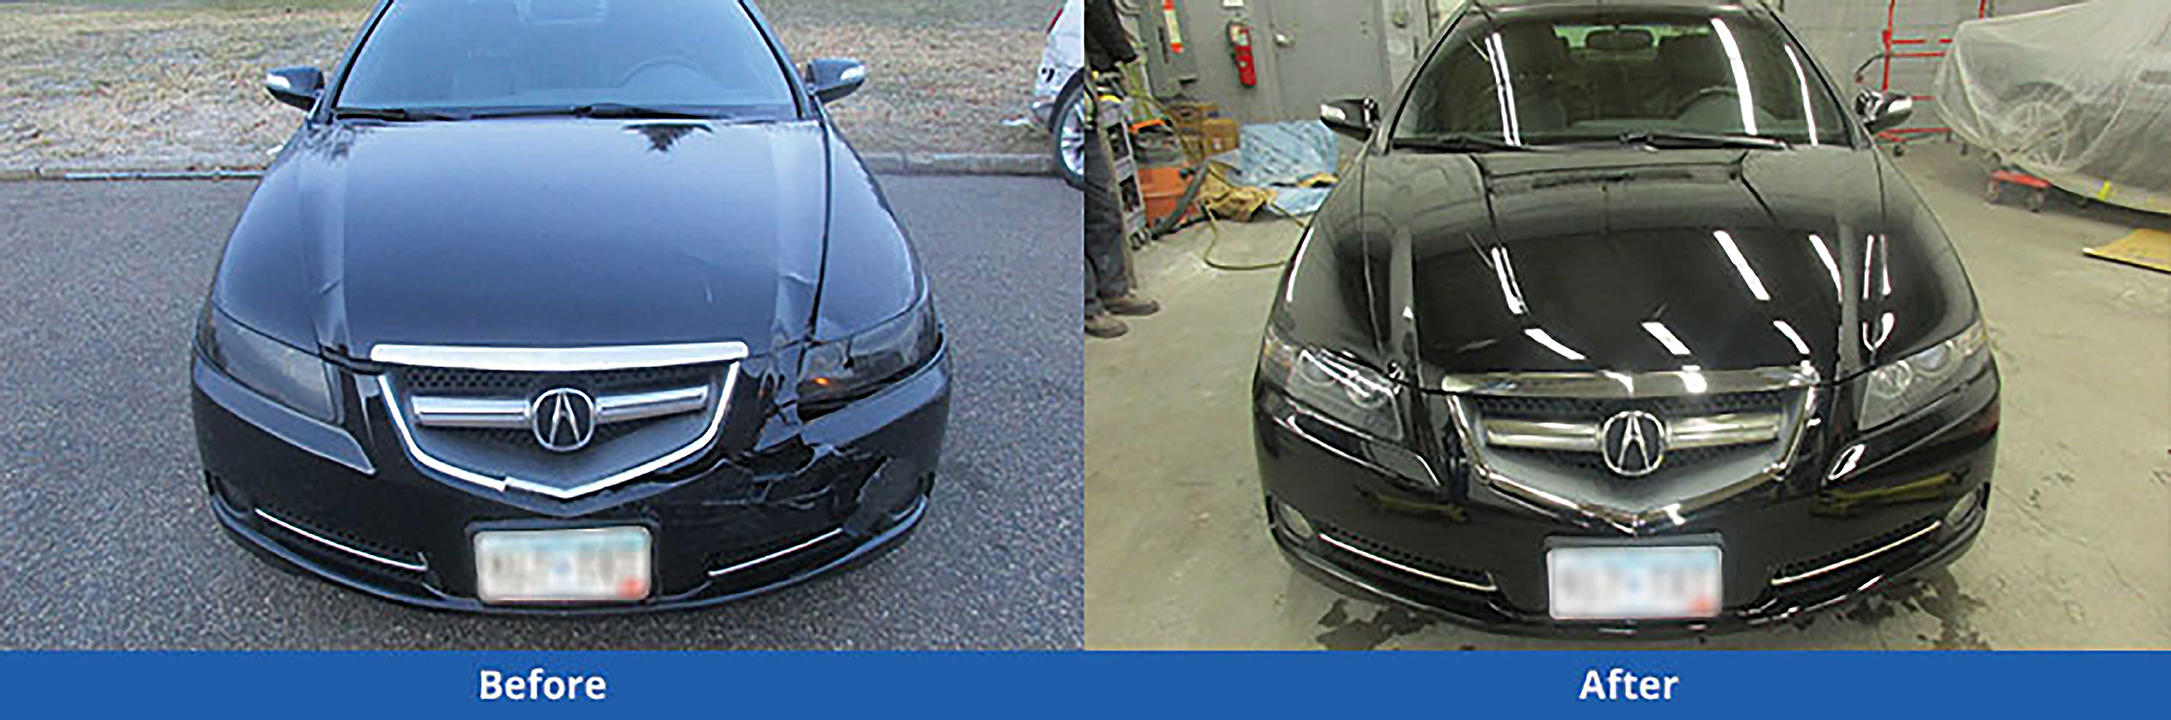 Advanced Collision Repair can improve your vehicles appearance by buffing the dents and adding a new coat of paint.